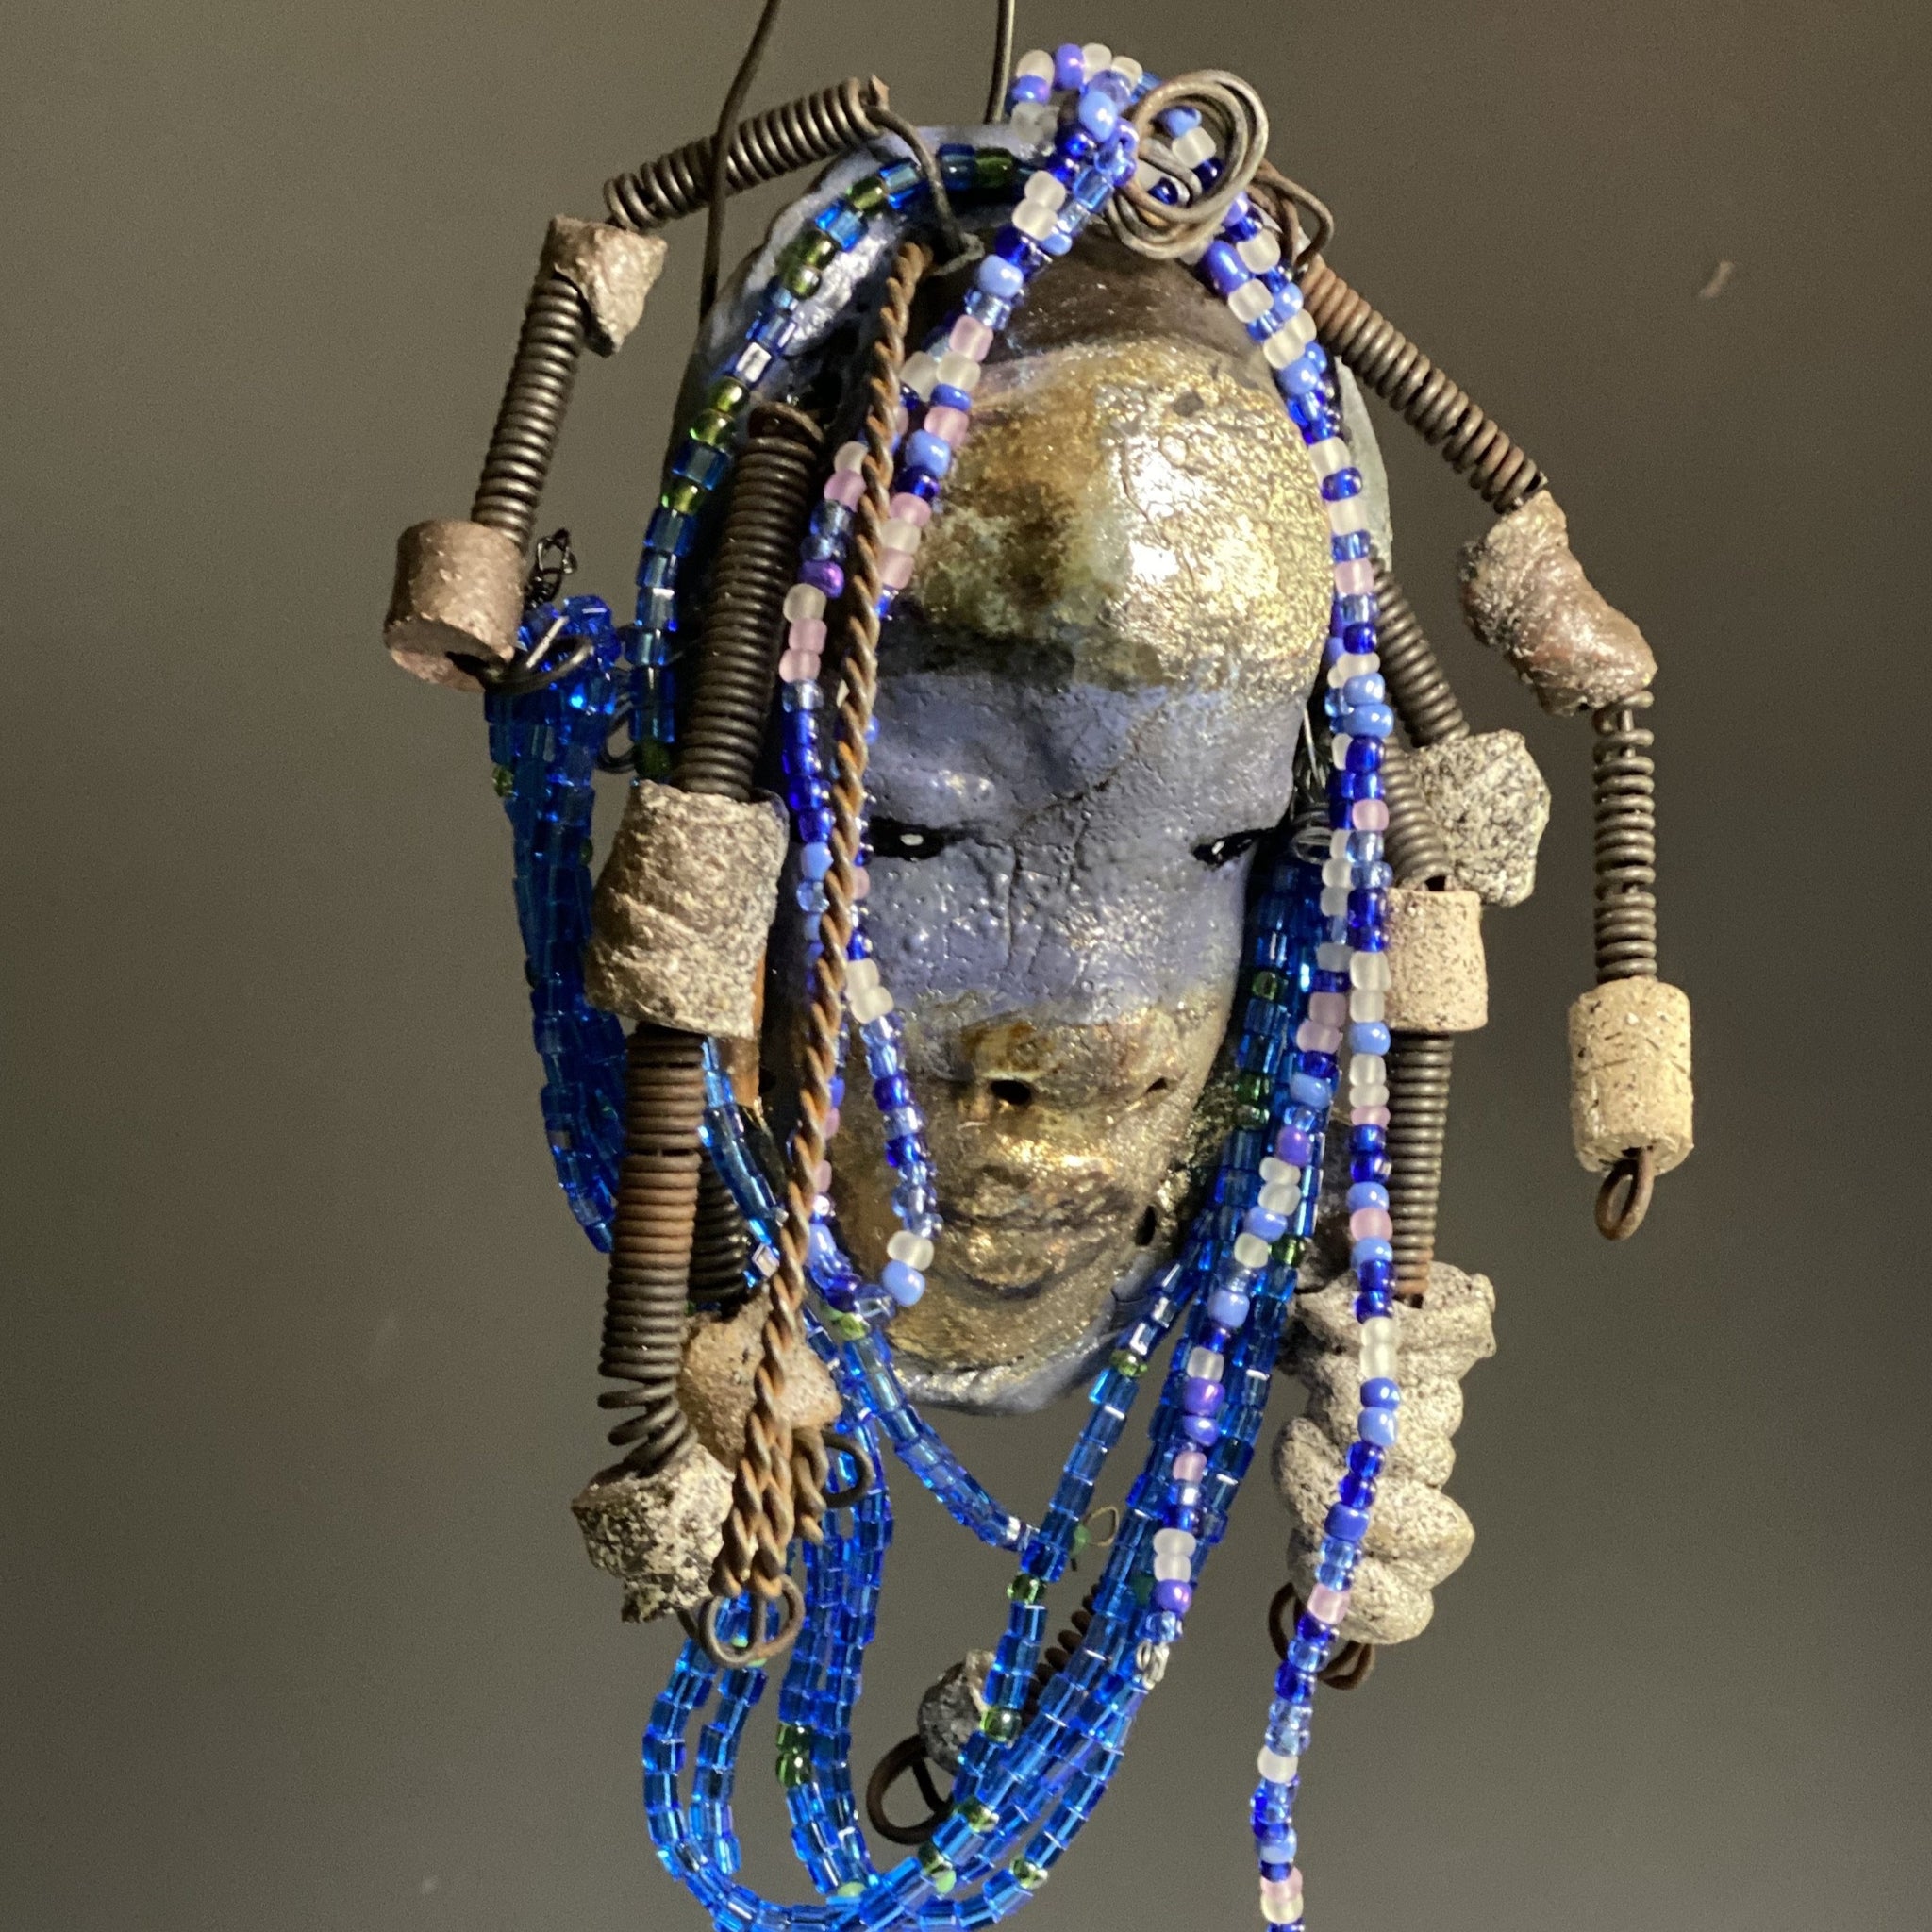  Meet Randi! I started making art soon after seeing authentic African artwork at the Smithsonian Museum of African Art. I was in total awe. Randi was inspired by my visit there.   Randi has a two tone complexion of golden silver and blue. She is 8" x 6" and weighs 14 ozs. Randi has over 10 raku beads. She has over 200 of multi shade of blue and white mini beads. Randi has over 10 feet of  coiled copper and 16 gauge wire hair.